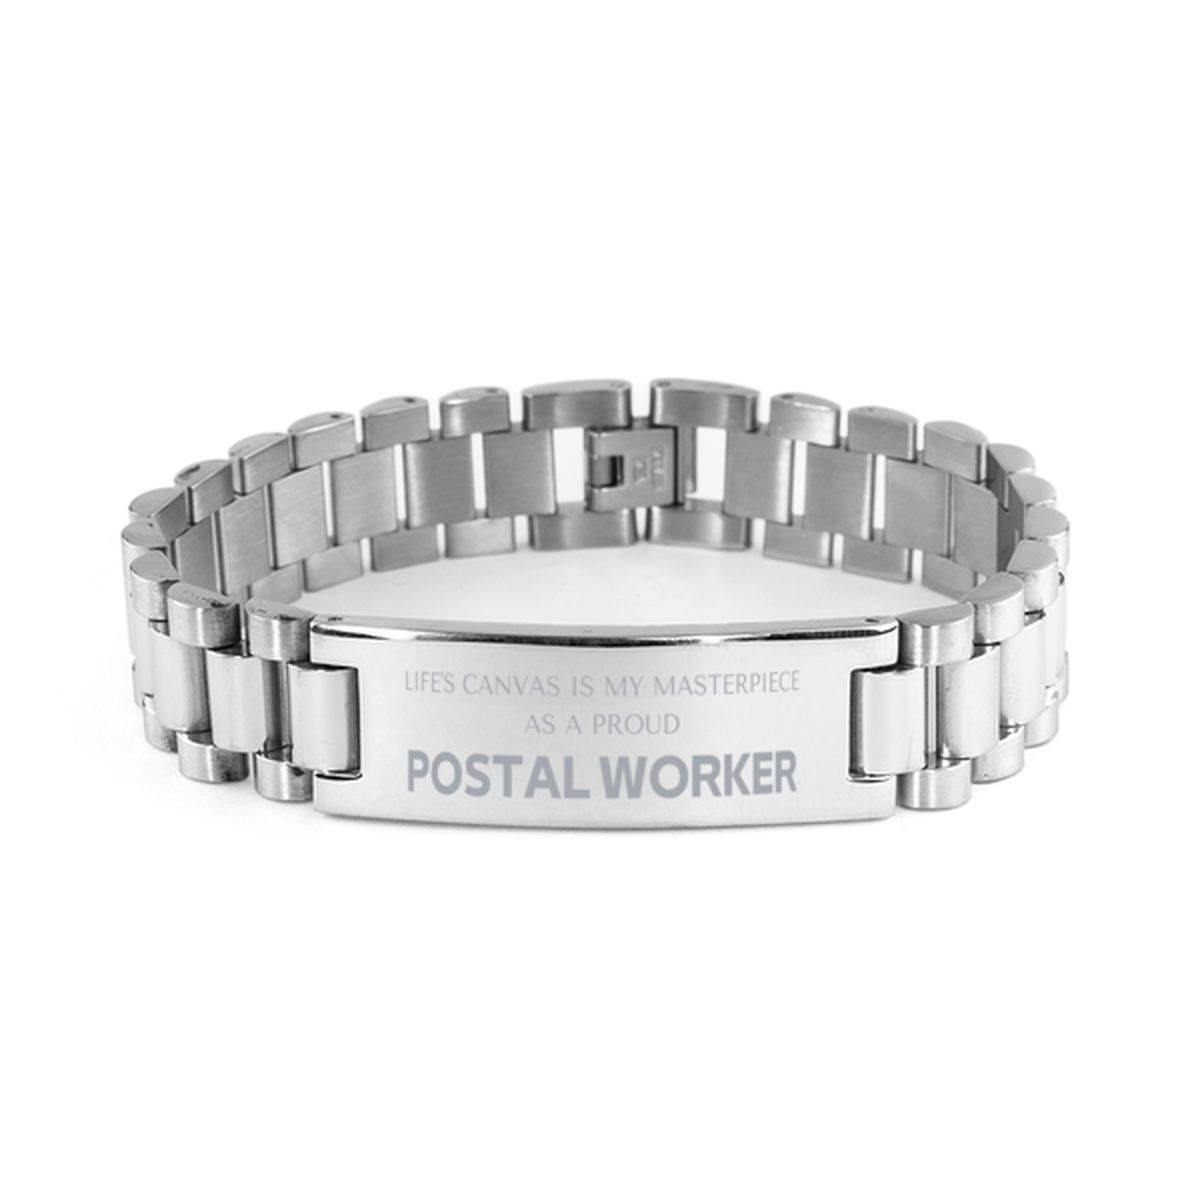 Proud Postal Worker Gifts, Life's canvas is my masterpiece, Epic Birthday Christmas Unique Ladder Stainless Steel Bracelet For Postal Worker, Coworkers, Men, Women, Friends